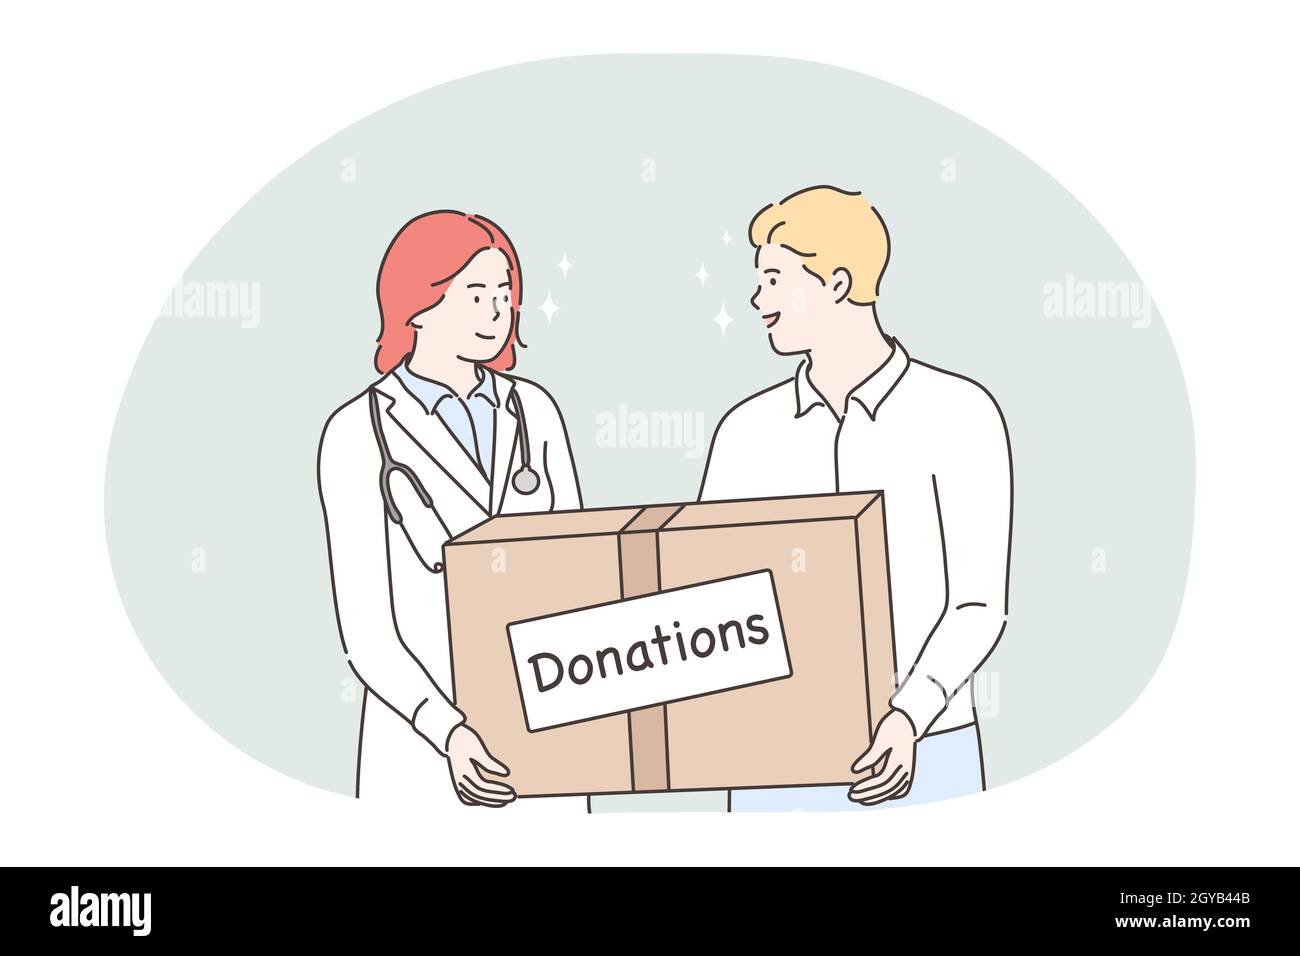 Donation, charity, humanitarian help concept. Young woman doctor and man volunteer cartoon characters standing and holding big box with donations in h Stock Photo